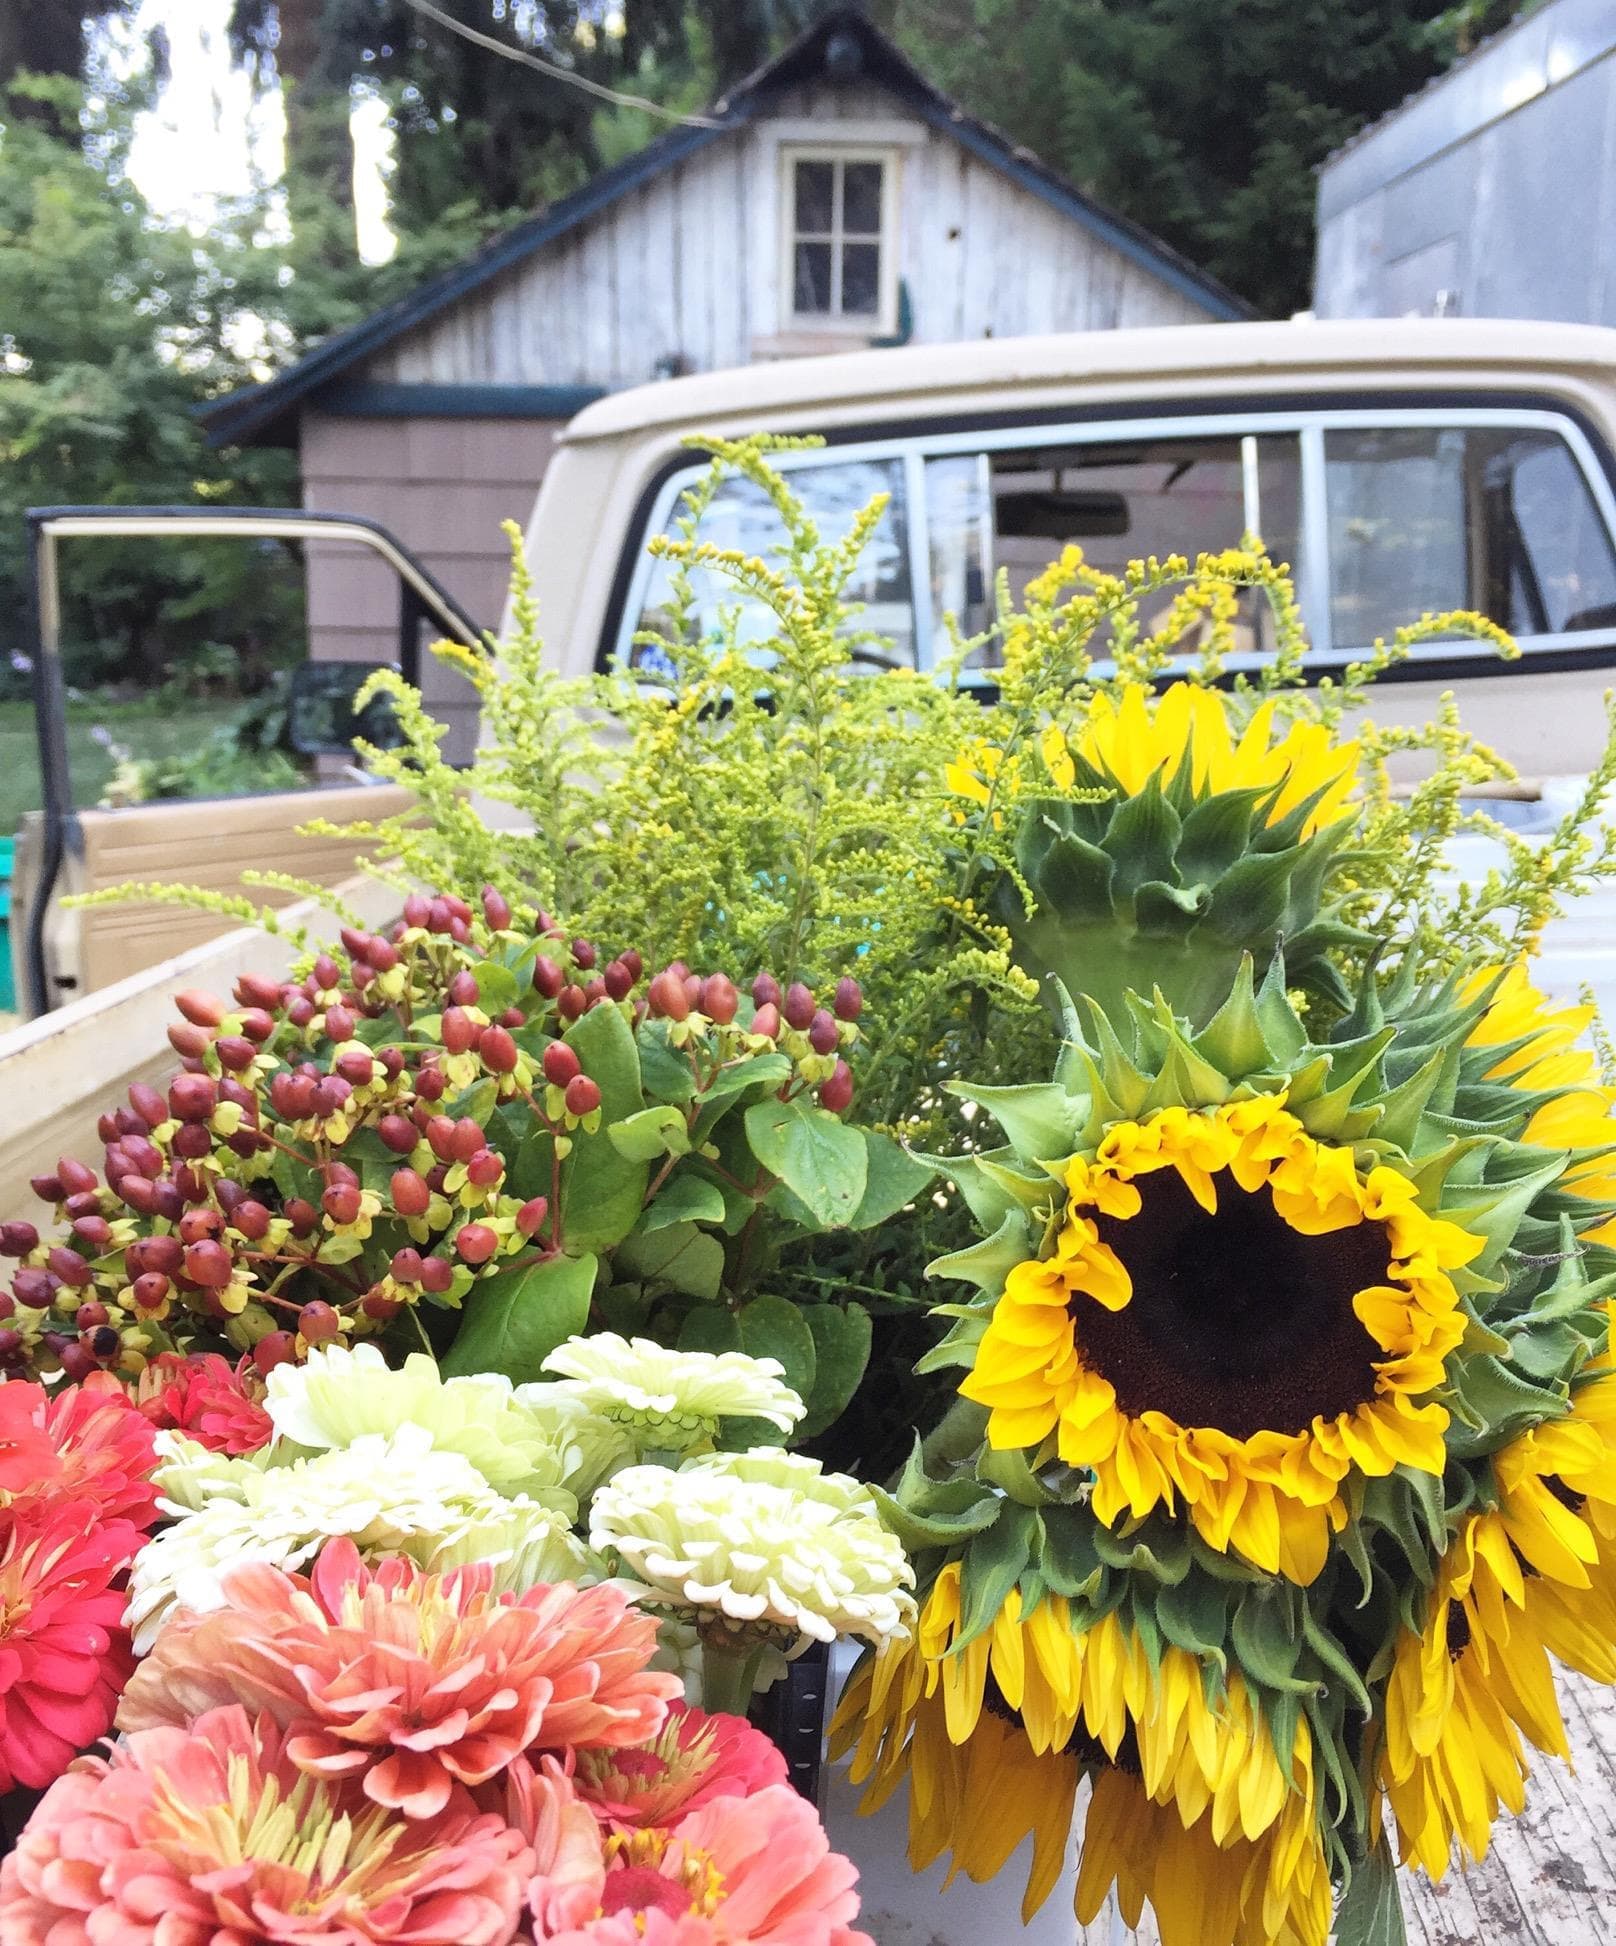 A yellow pick up truck full of freshly harvested hypericum berries, solidago goldenrod, zinnias and sunflowers from the fields of Le Mera Gardens.  Loose bulk flowers to decorate local farm to table fundraiser for The Bee Girl Organization in Jacksonville Oregon.   